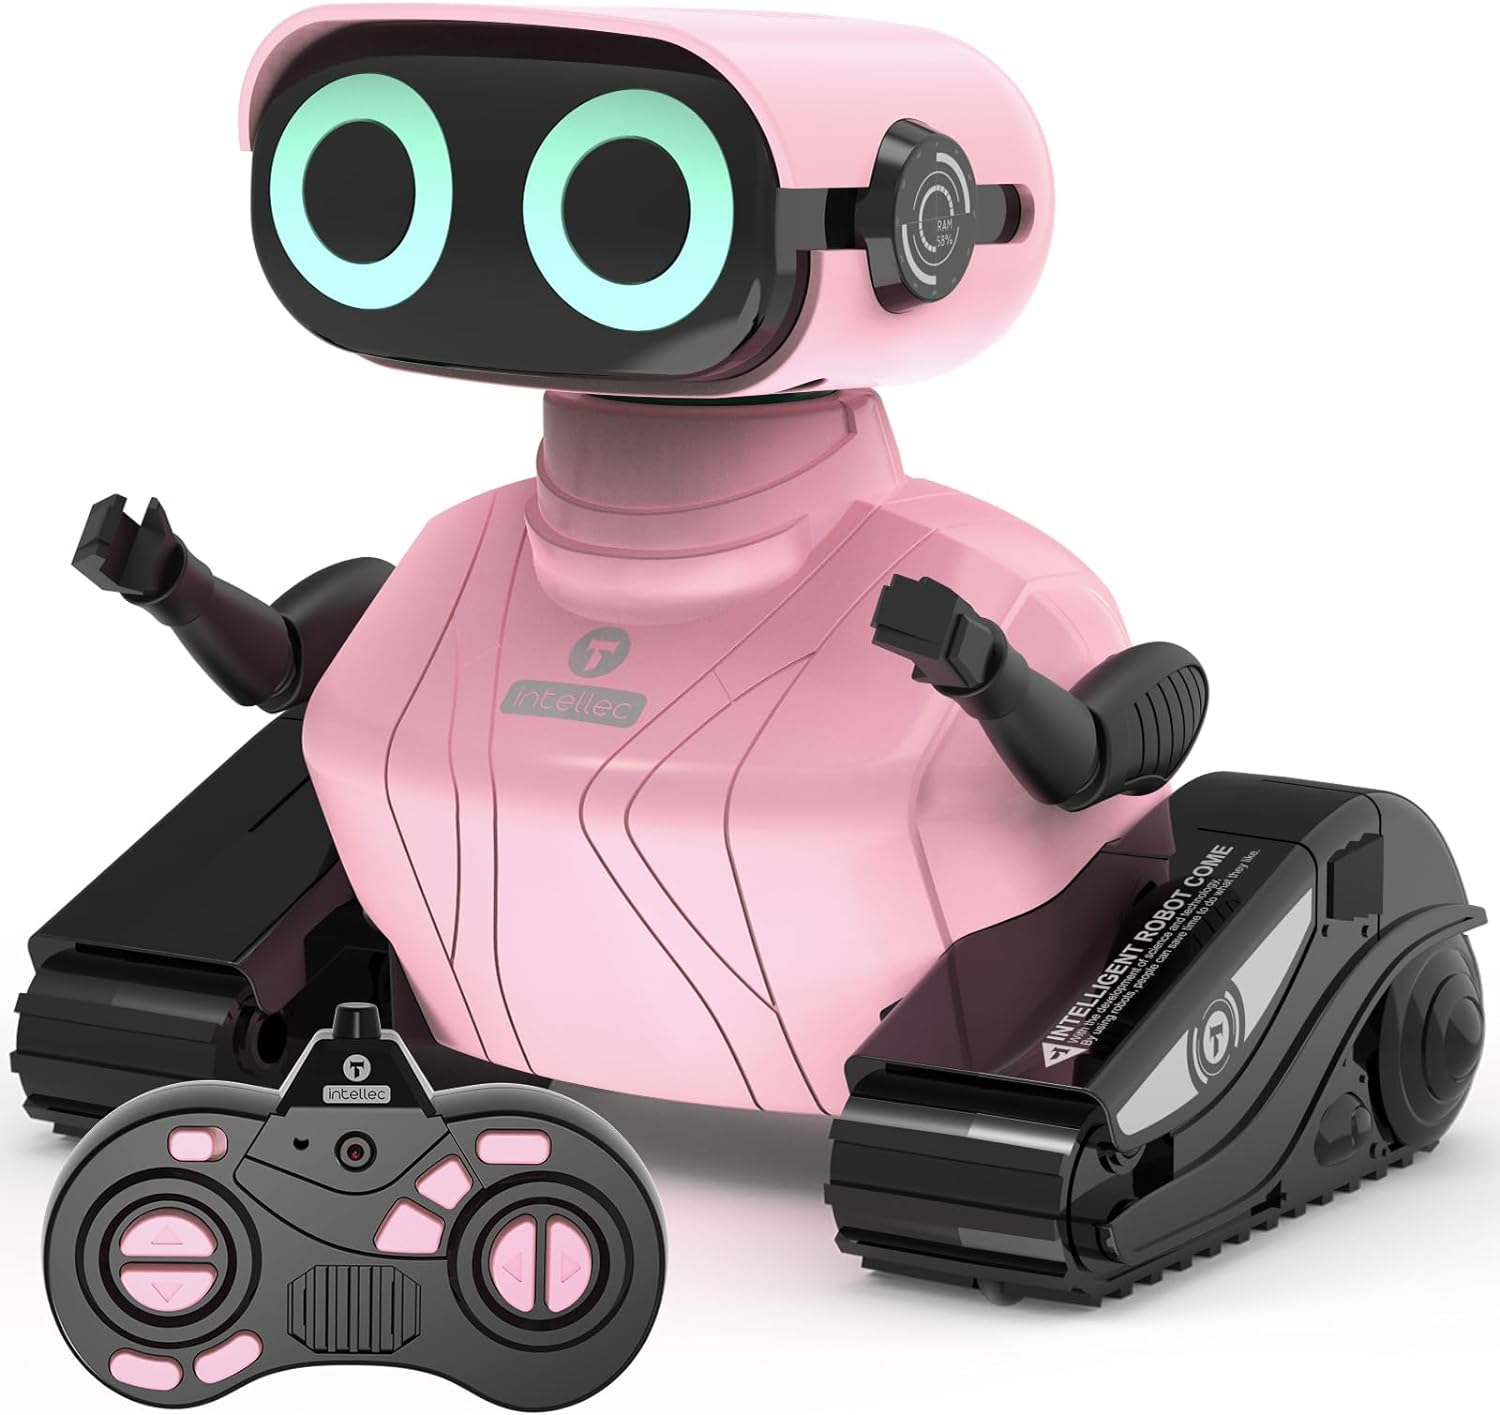 GILOBABY Robot Toys, Remote Control Robot Toy, RC Robots for Kids with LED Eyes, Flexible Head  Arms, Dance Moves and Music, Birthday Gifts for Girls Ages 5+ Years (Pink)